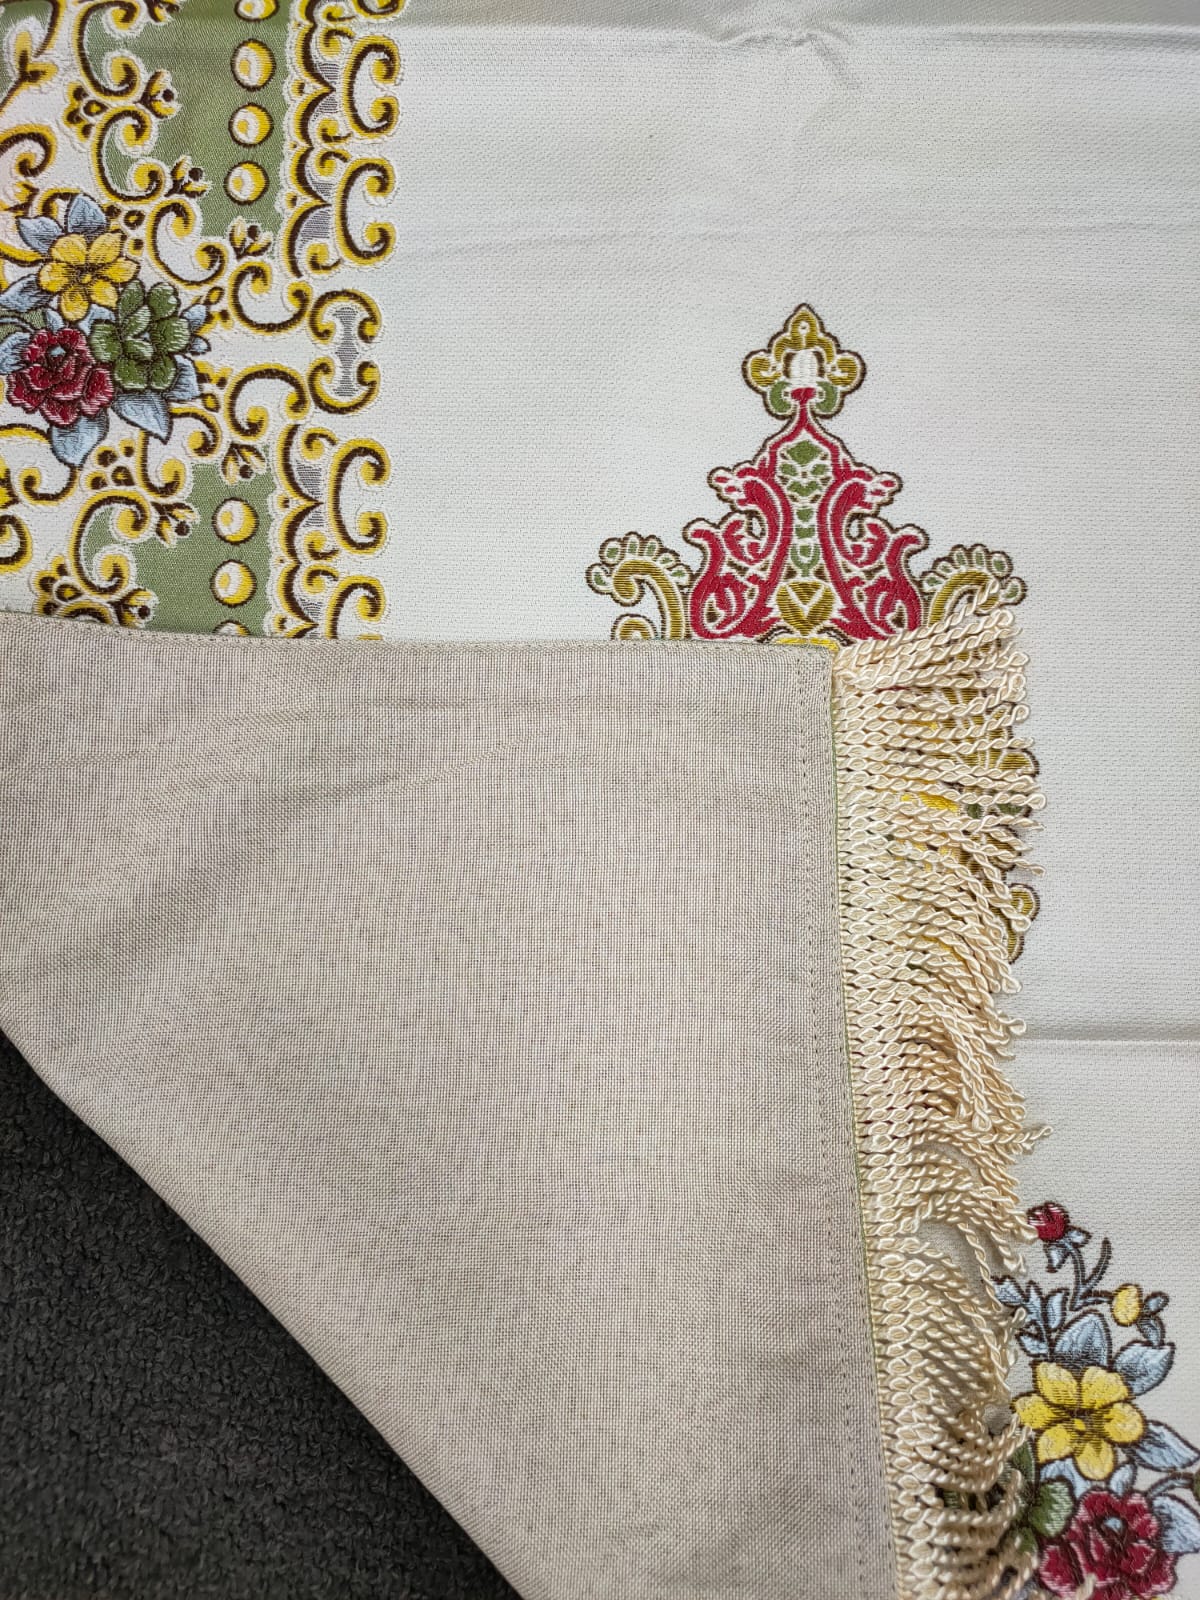 Our Embroidered Prayer Rug in Beige exclusive at Hikmah Boutique, delicately design by skilled artisans, embodies the essence of devotion and serenity. Experience the embrace of softness with our luxurious prayer rug, designed to cradle your prayers in comfort and grace.